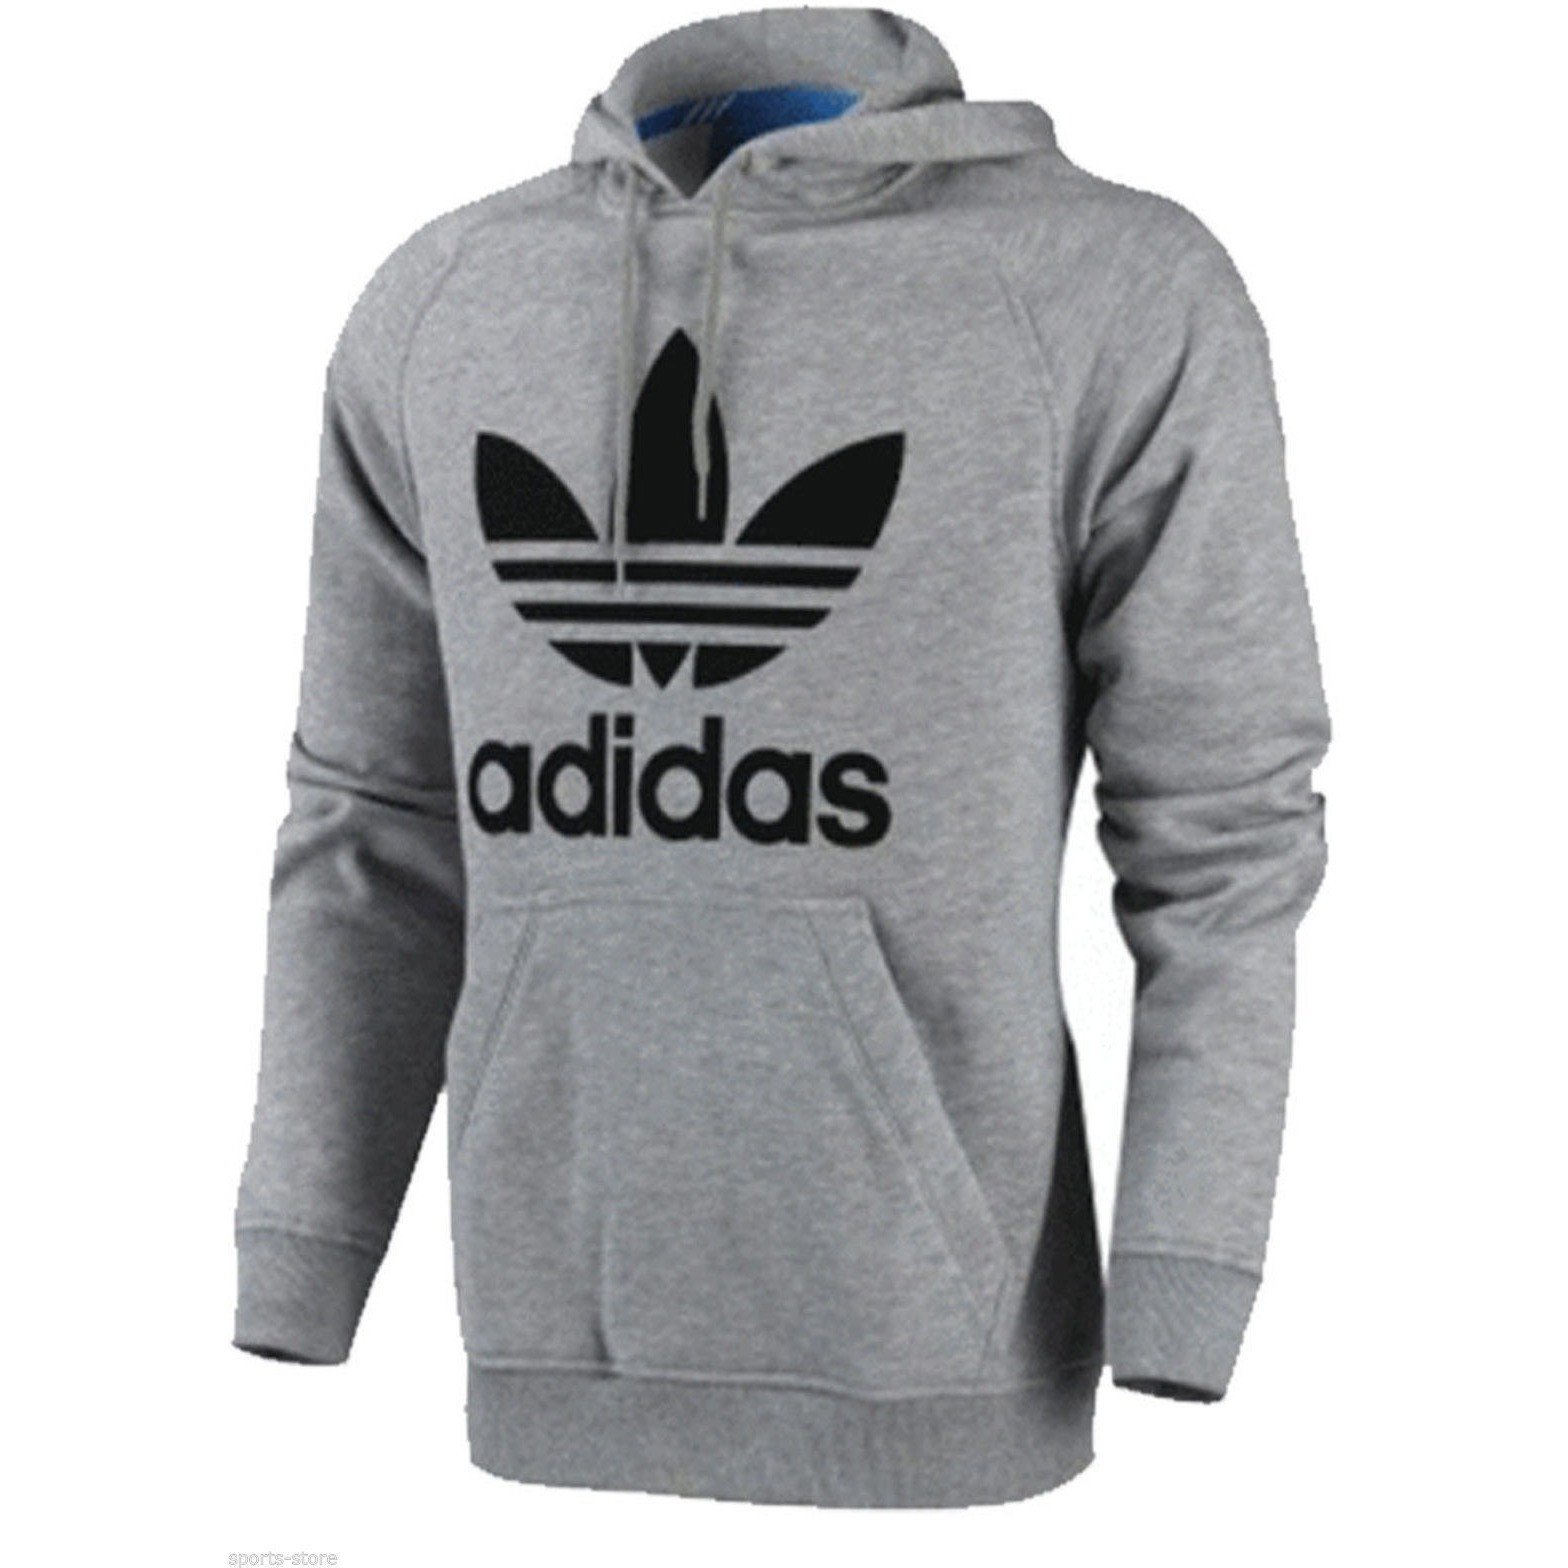 Adidas sweatshirt – made of pure cotton and other high grade materials